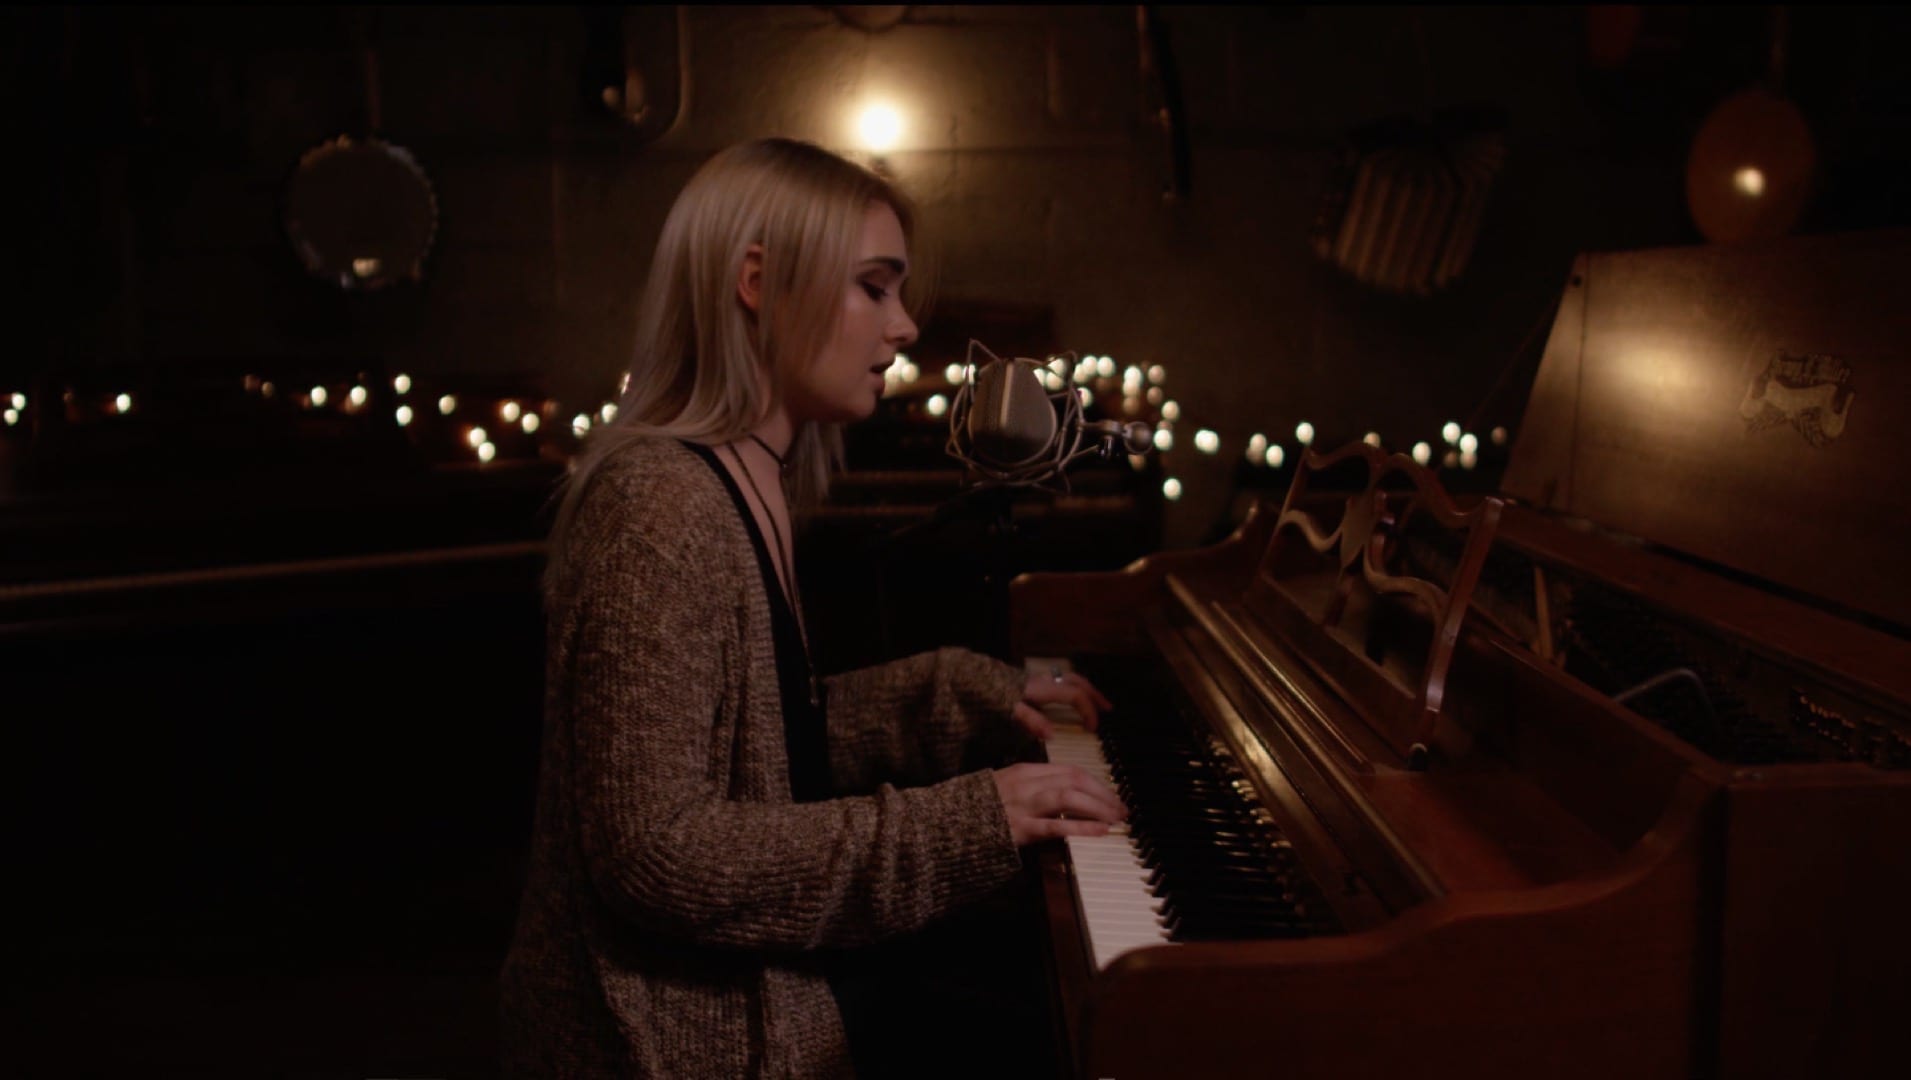 Love Abbey Woman with long blond hair and wearing a beige knitted coat playing a piano and singing in a candlelight scene.